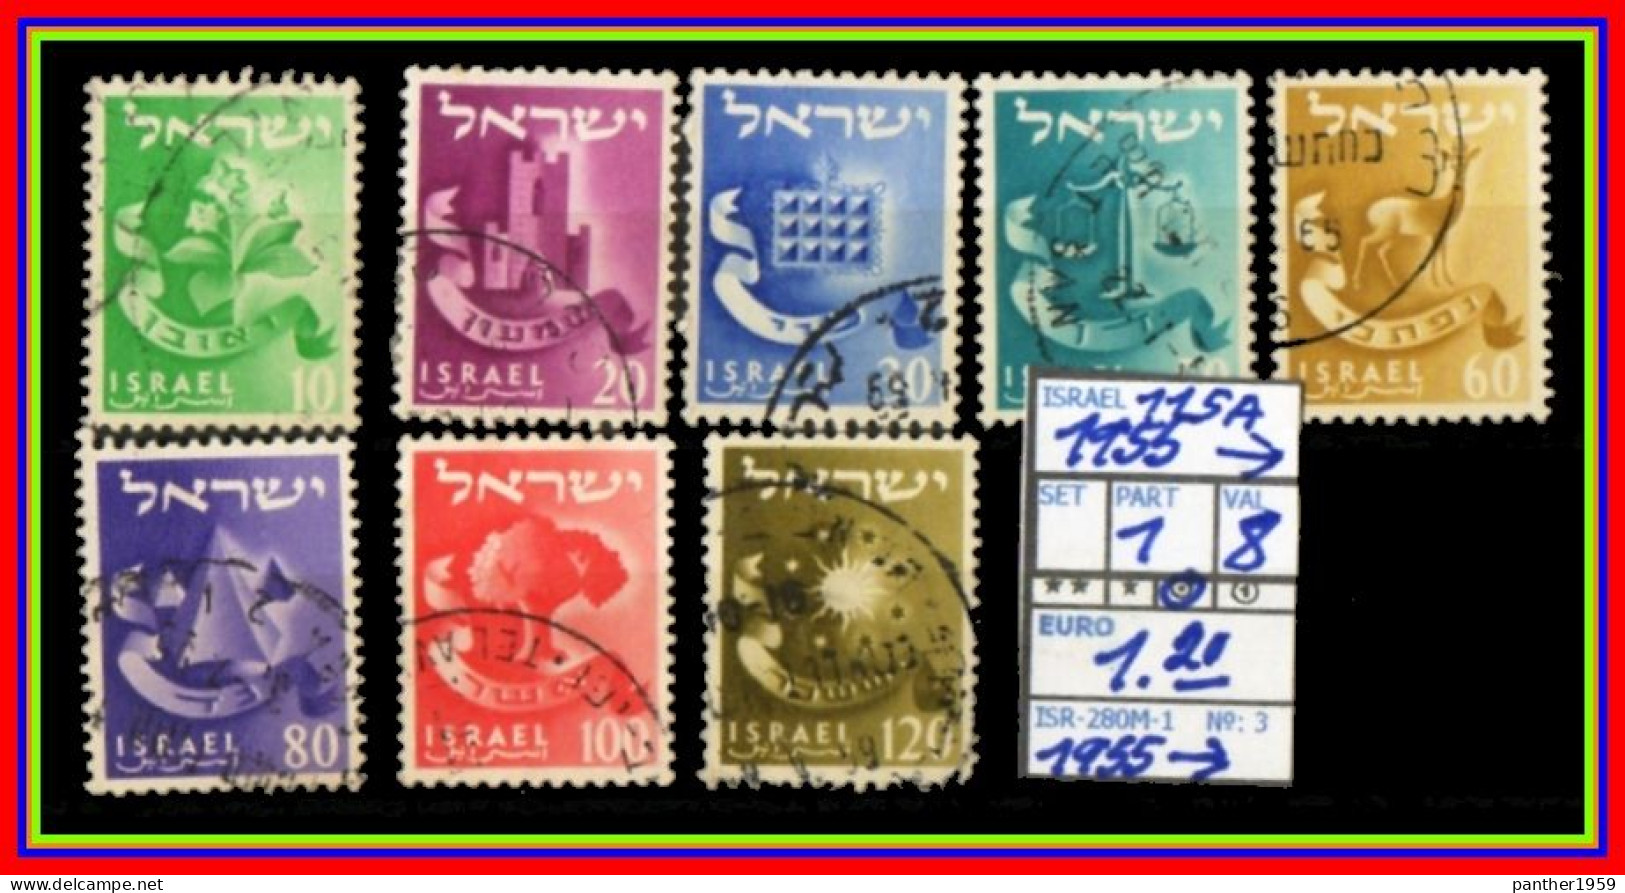 ASIA# ISRAEL# REPUBLIC#DEFINITVES#PARTIAL SET# USED# (ISR-280M-1) (03) - Used Stamps (without Tabs)